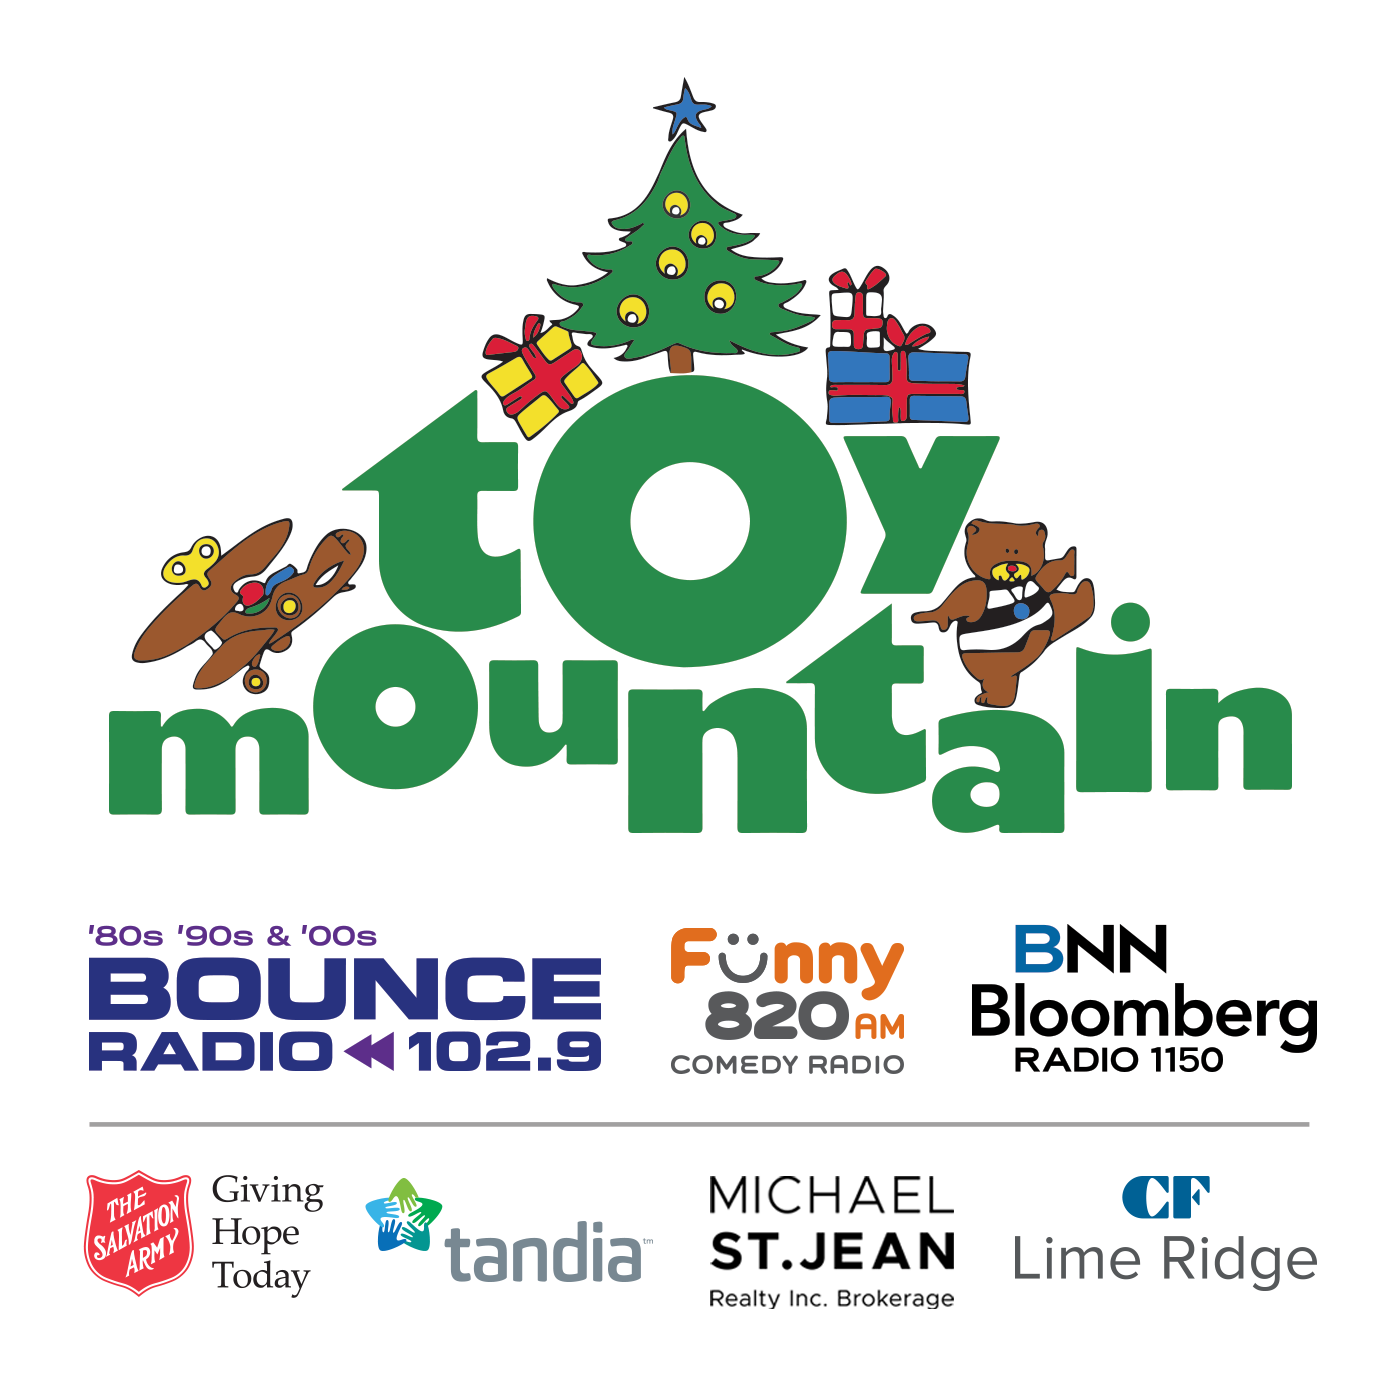 TOY MOUNTAIN - Michael St. Jean Realty